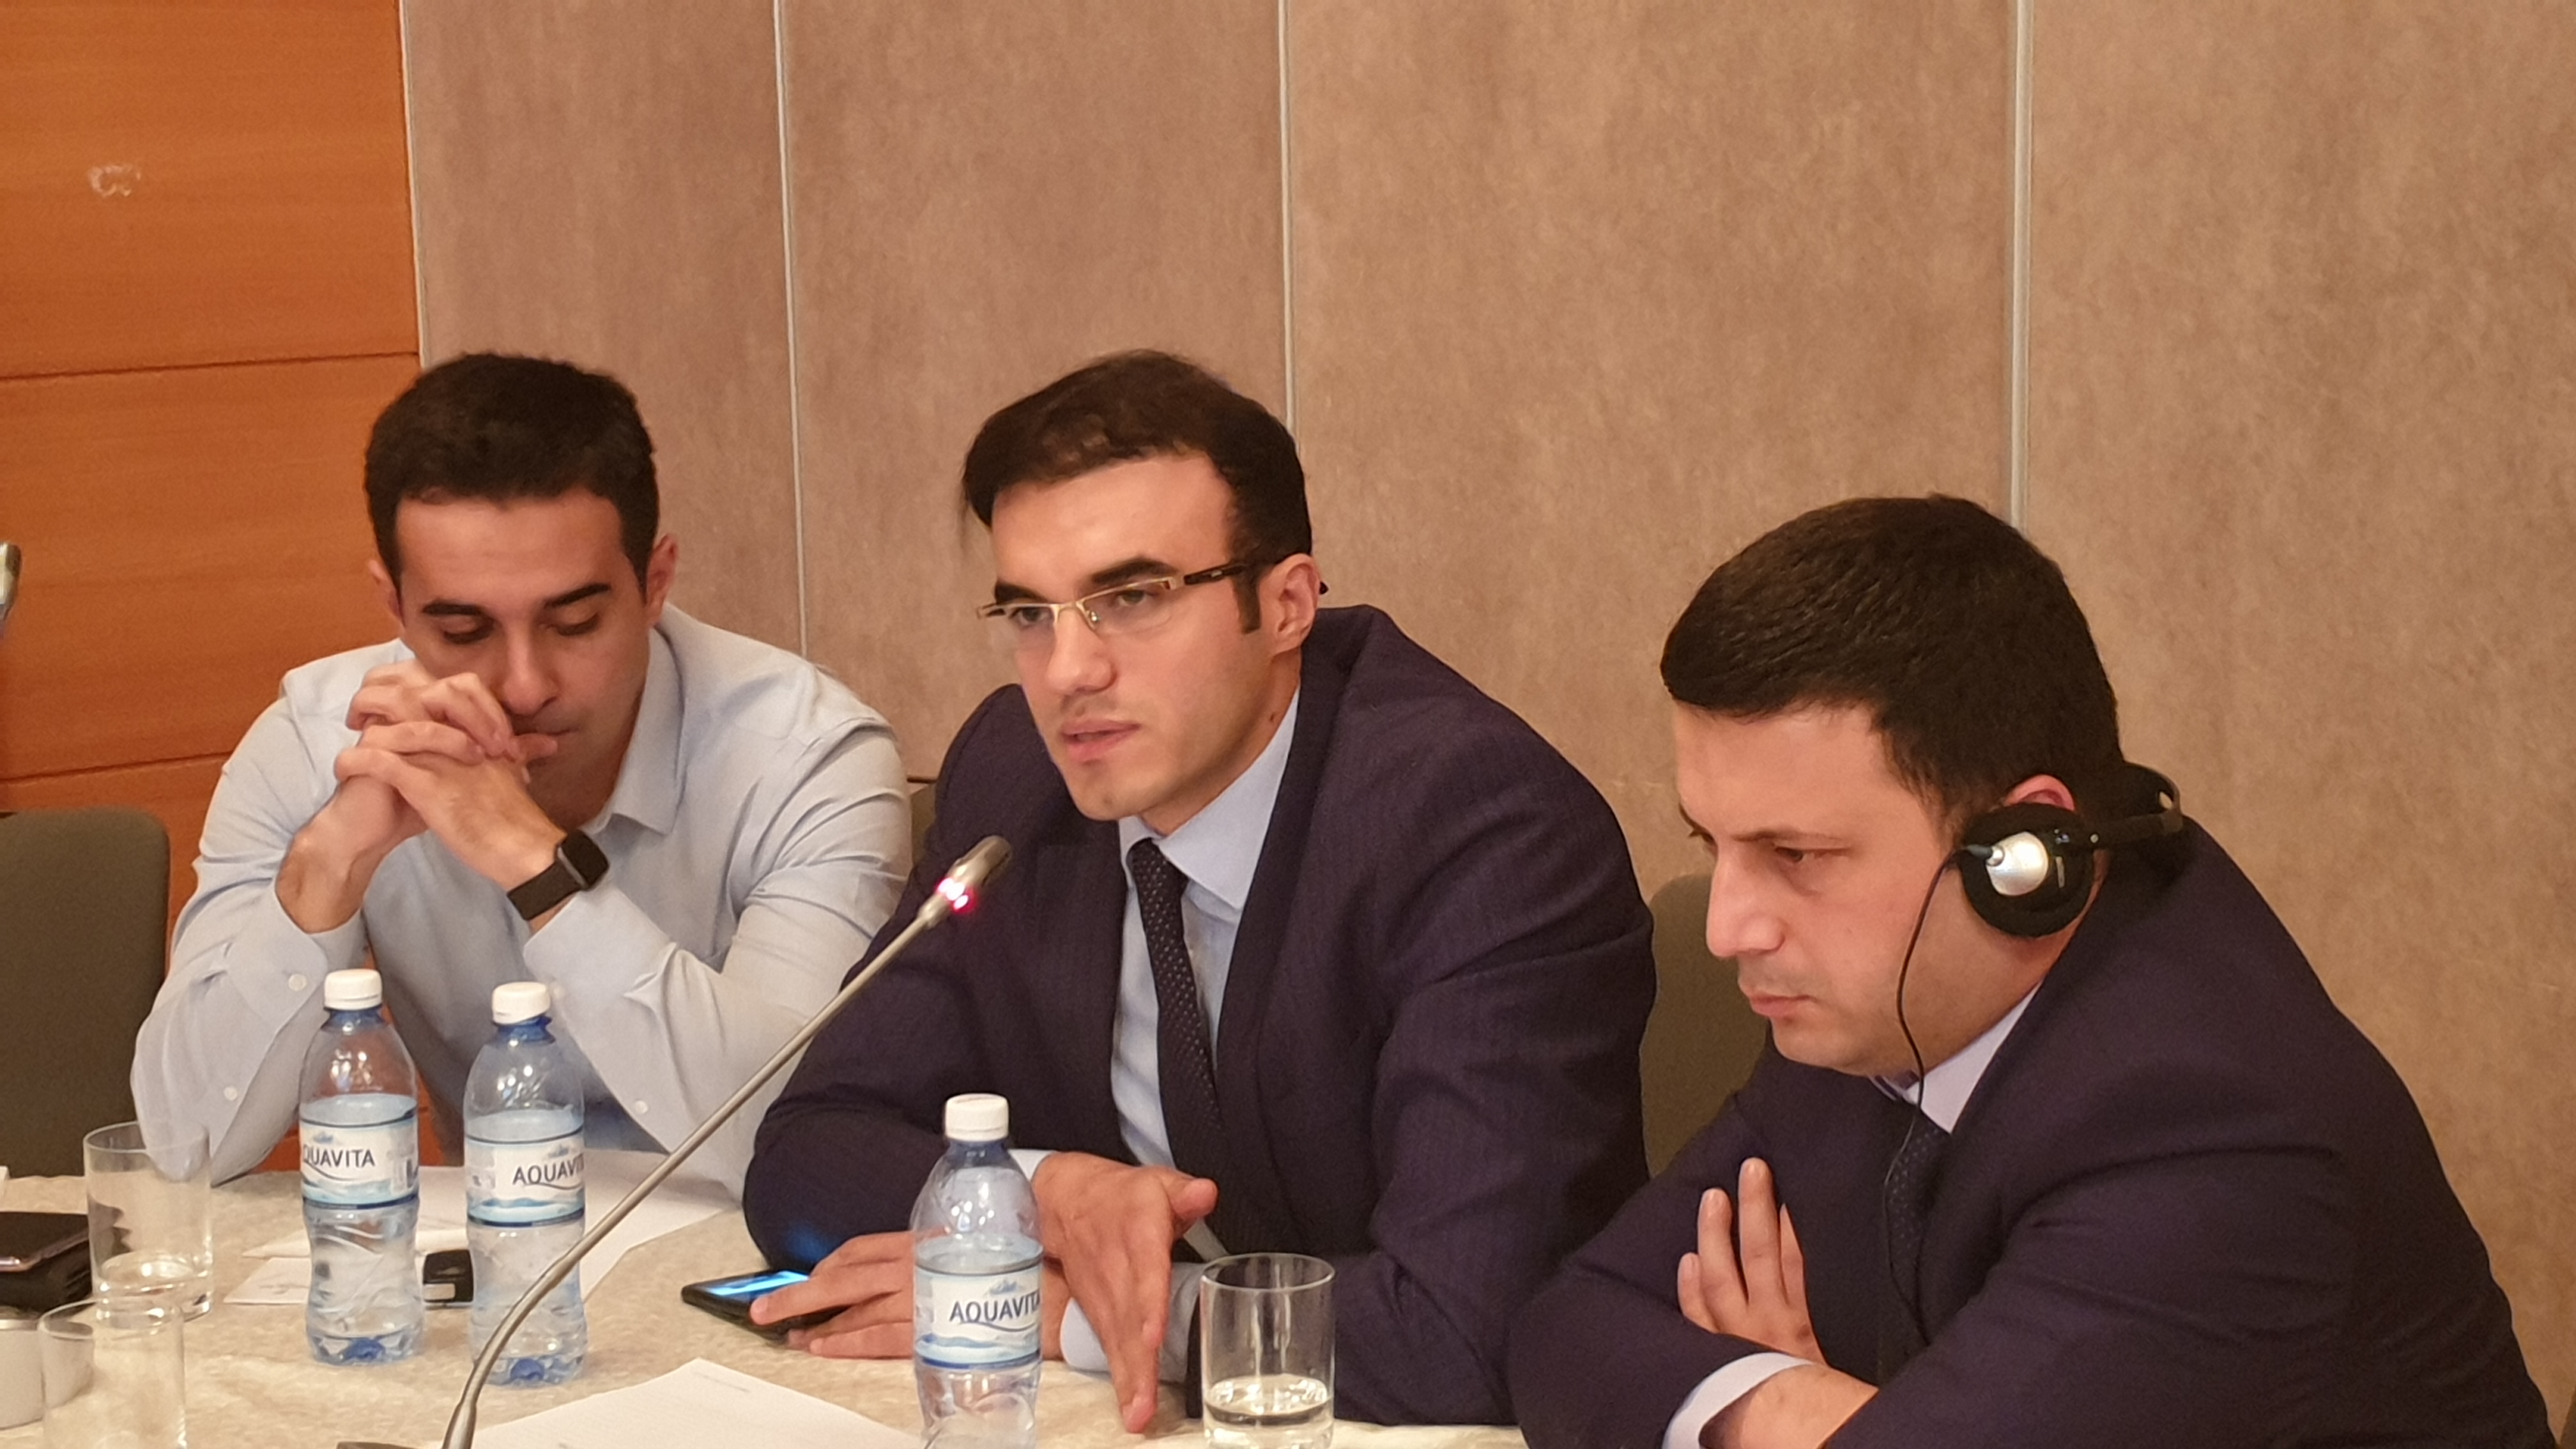 Training on mutual legal assistance in anti-money laundering and counter-terrorist financing in Azerbaijan